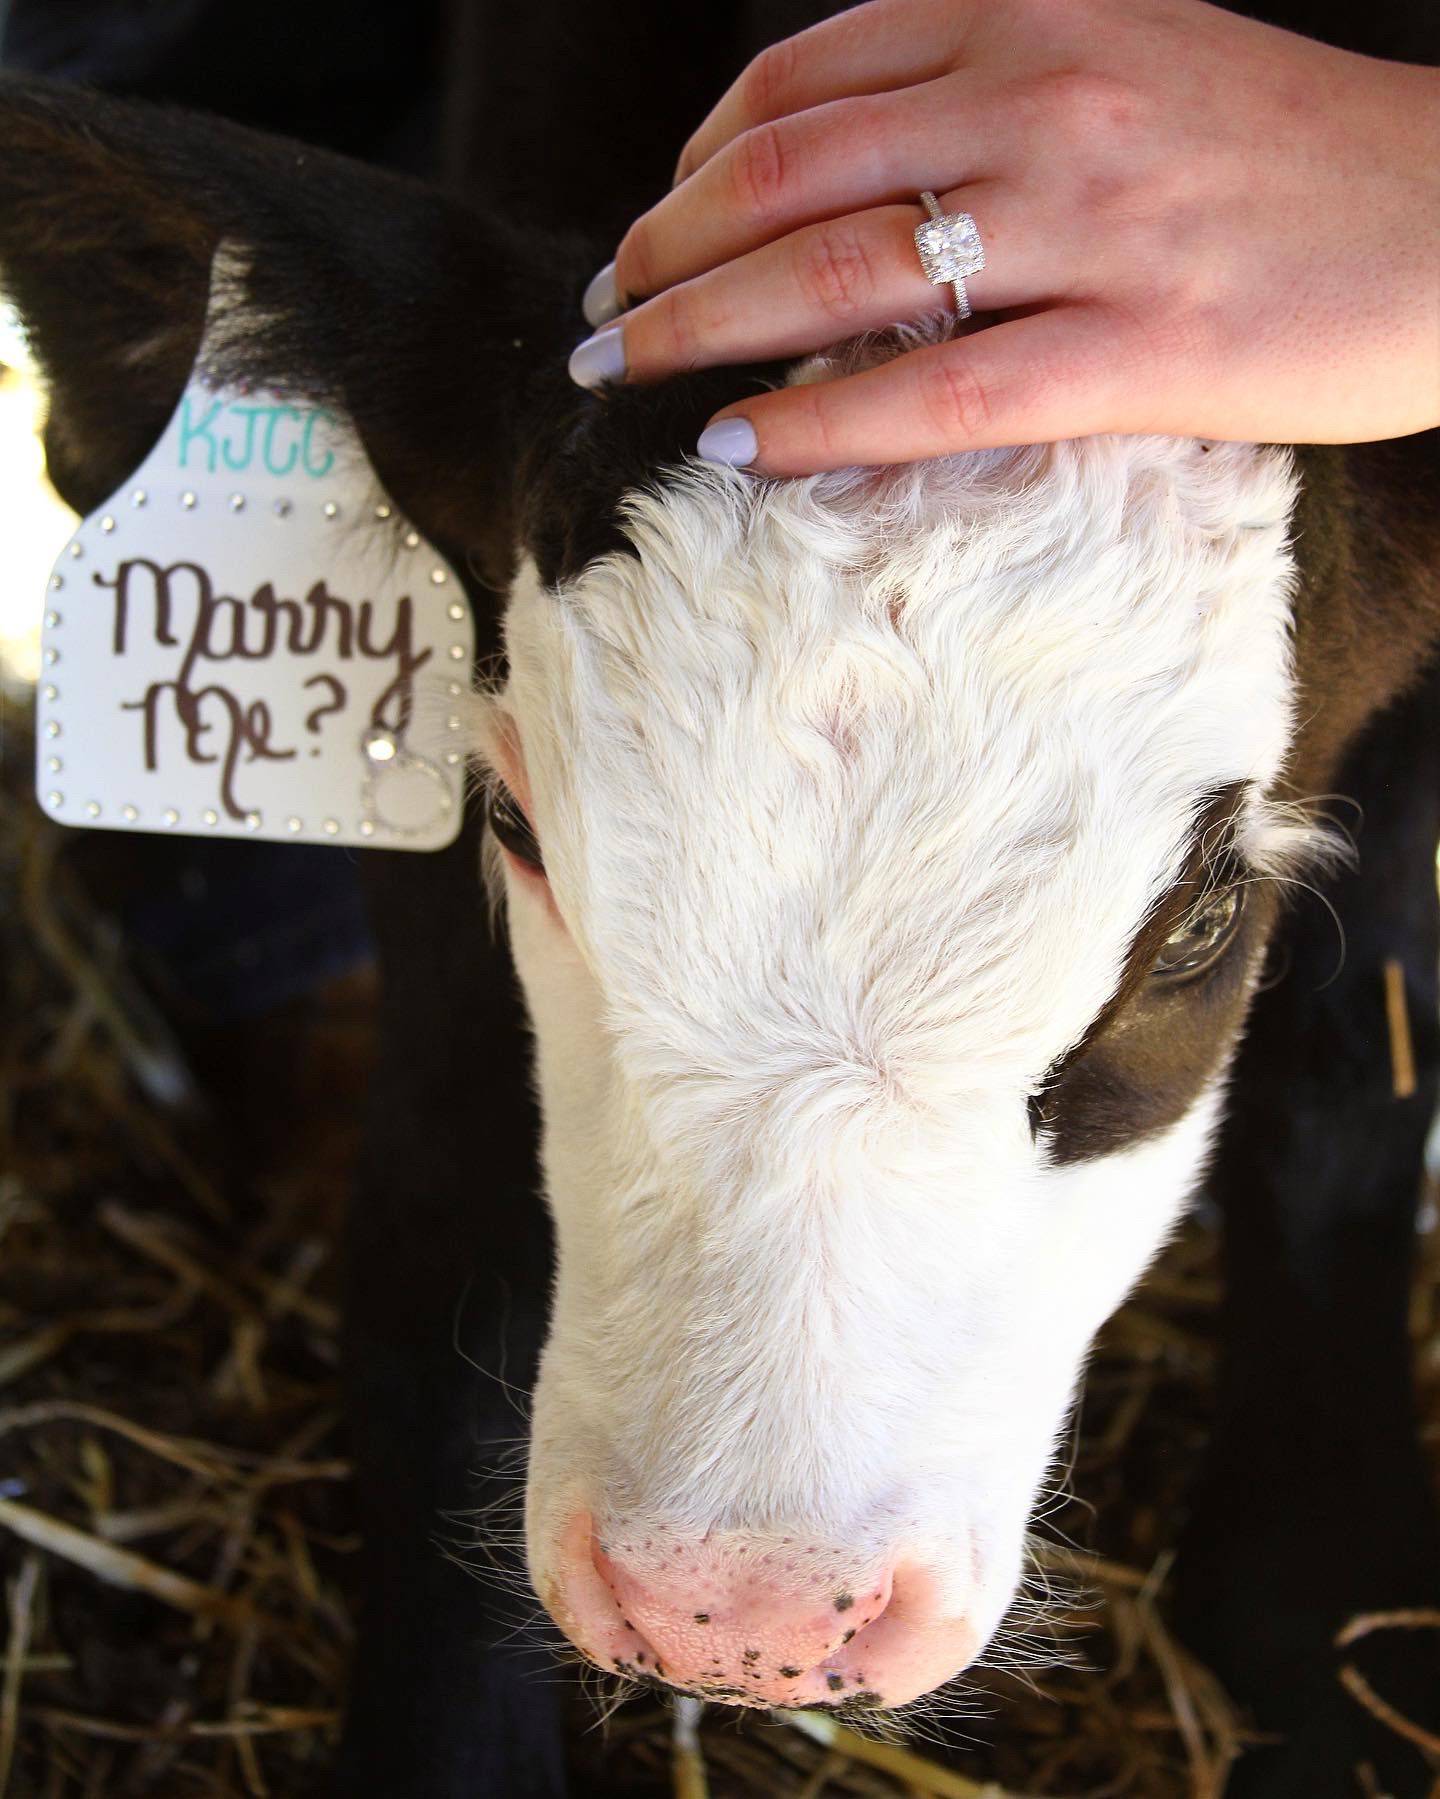 “Marry Me?” — Alexis Noel: “When you go to tag the new calf, but it already had a tag!”